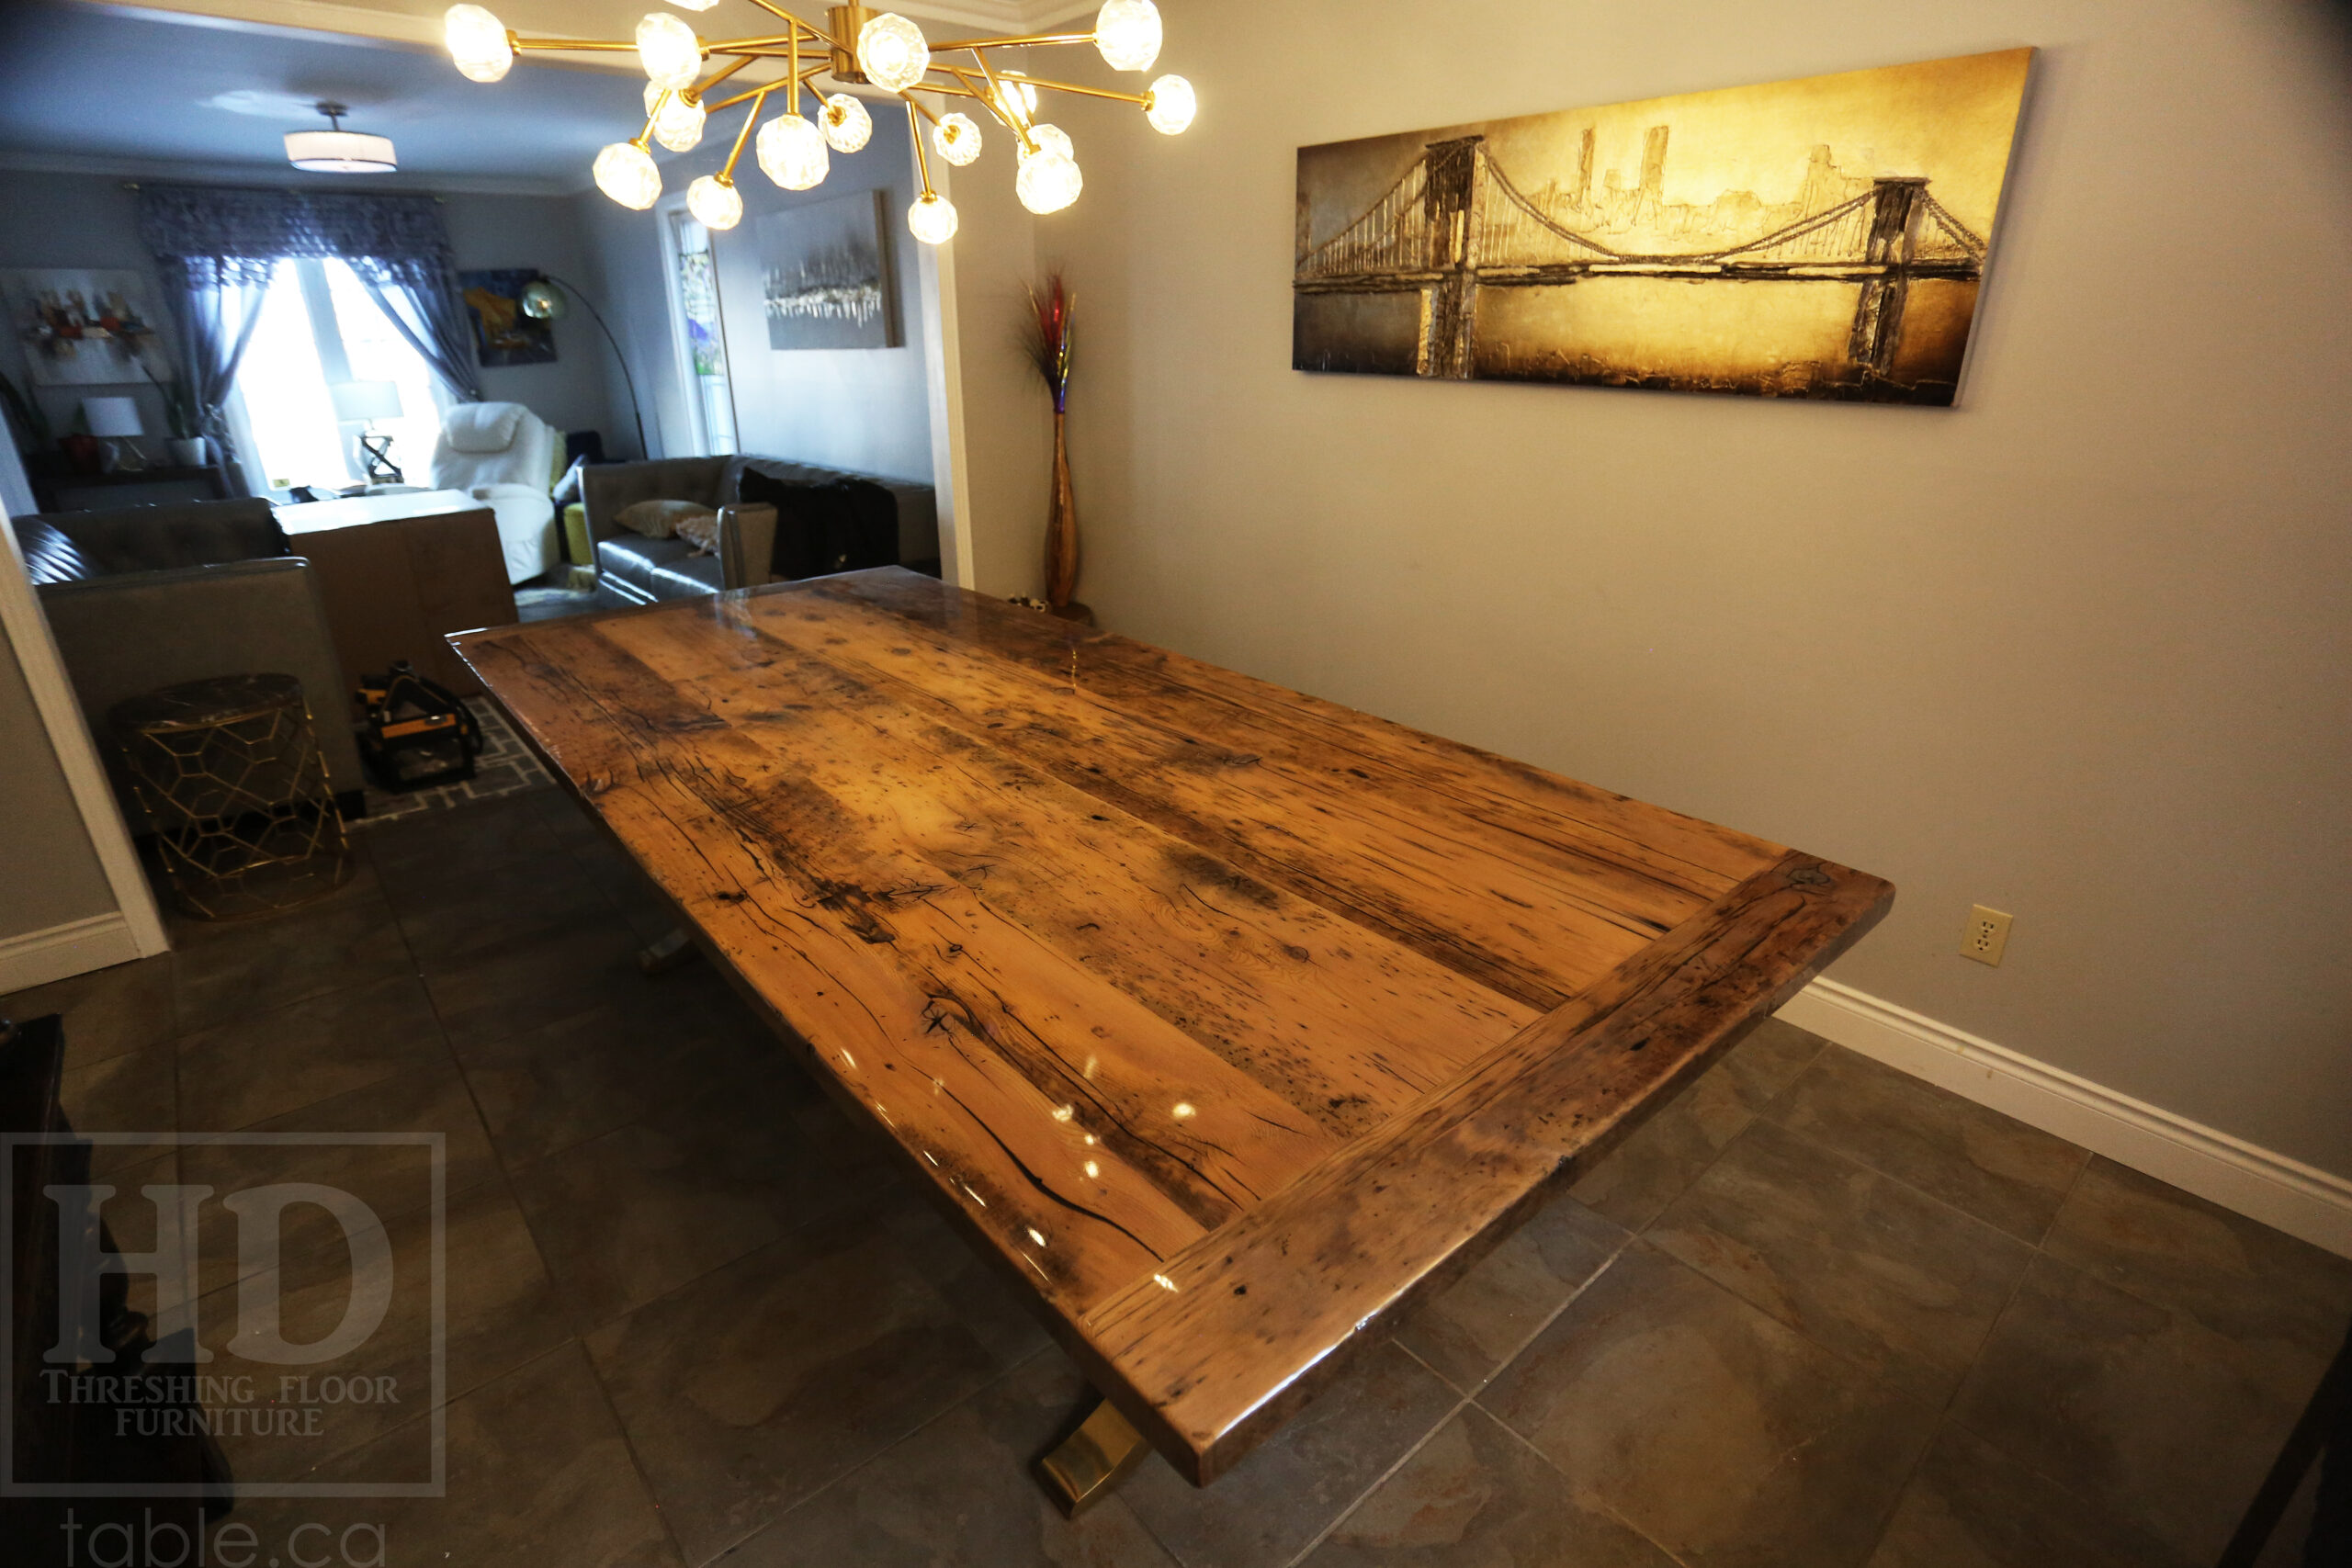 Project Summary: 9’ Reclaimed Ontario Barnwood Table Top we made for a Kitchener, Ontario home – 48” wide - Old Growth Hemlock Threshing Floor Construction - Original edges & distressing maintained – Bread Edge Boards – Greytone Option - Premium epoxy + high gloss option polyurethane finish - www.table.ca